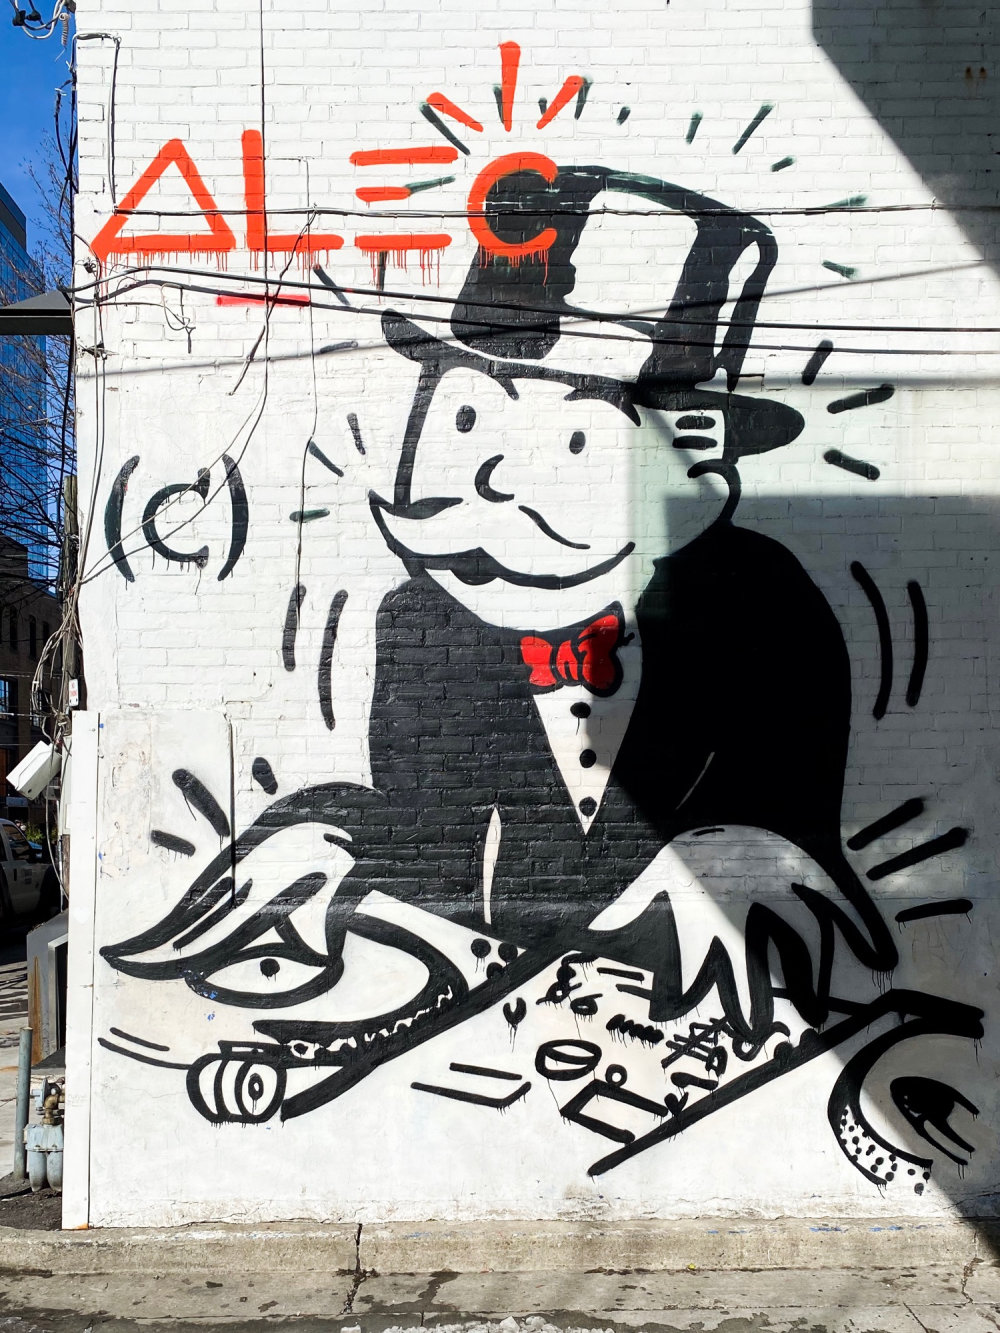 mural in Toronto by artist Alec Monopoly.